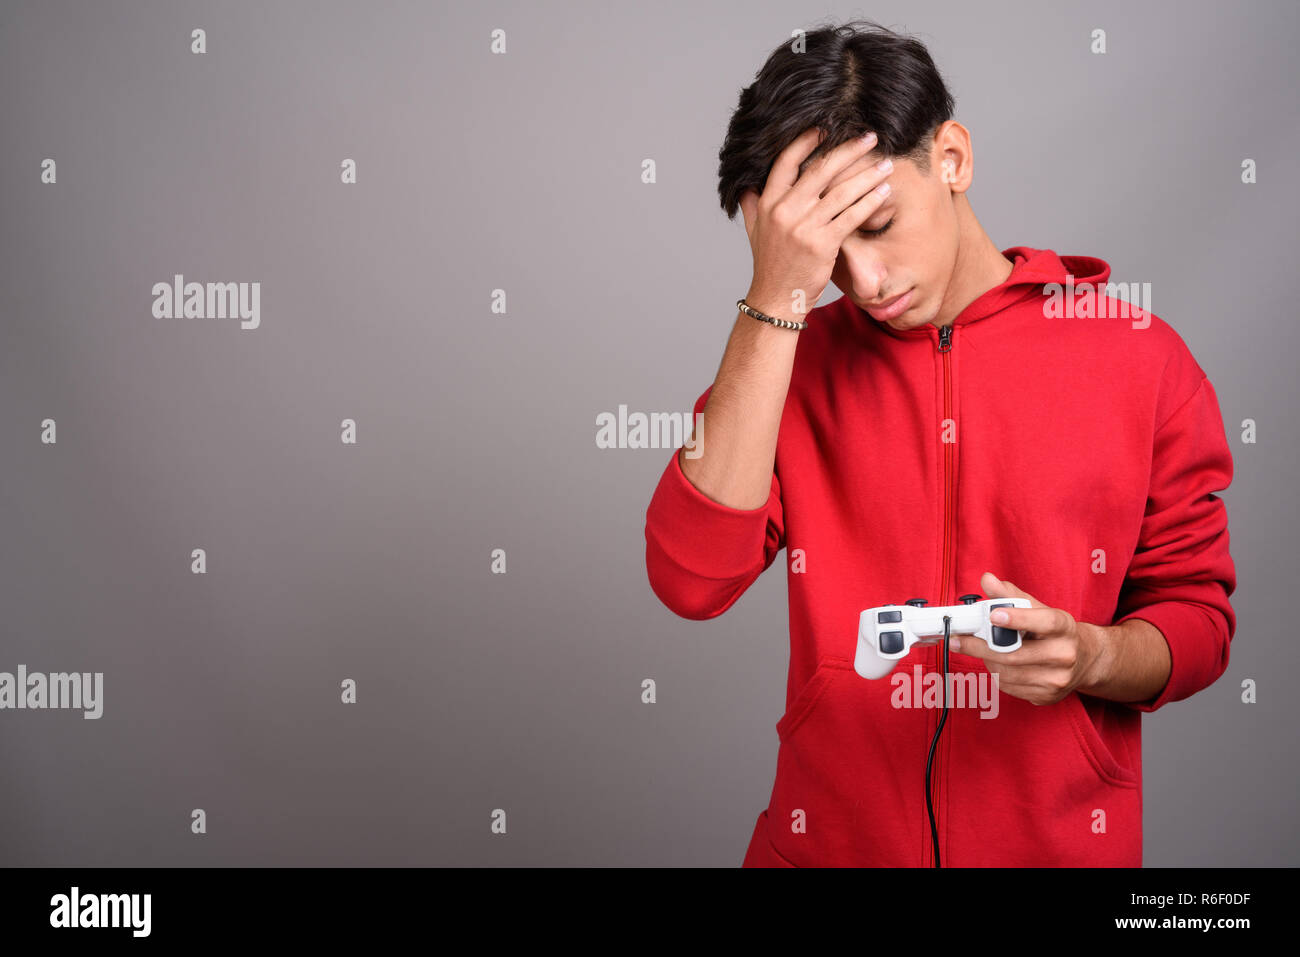 Persian teenage boy playing video games with game controller Stock Photo